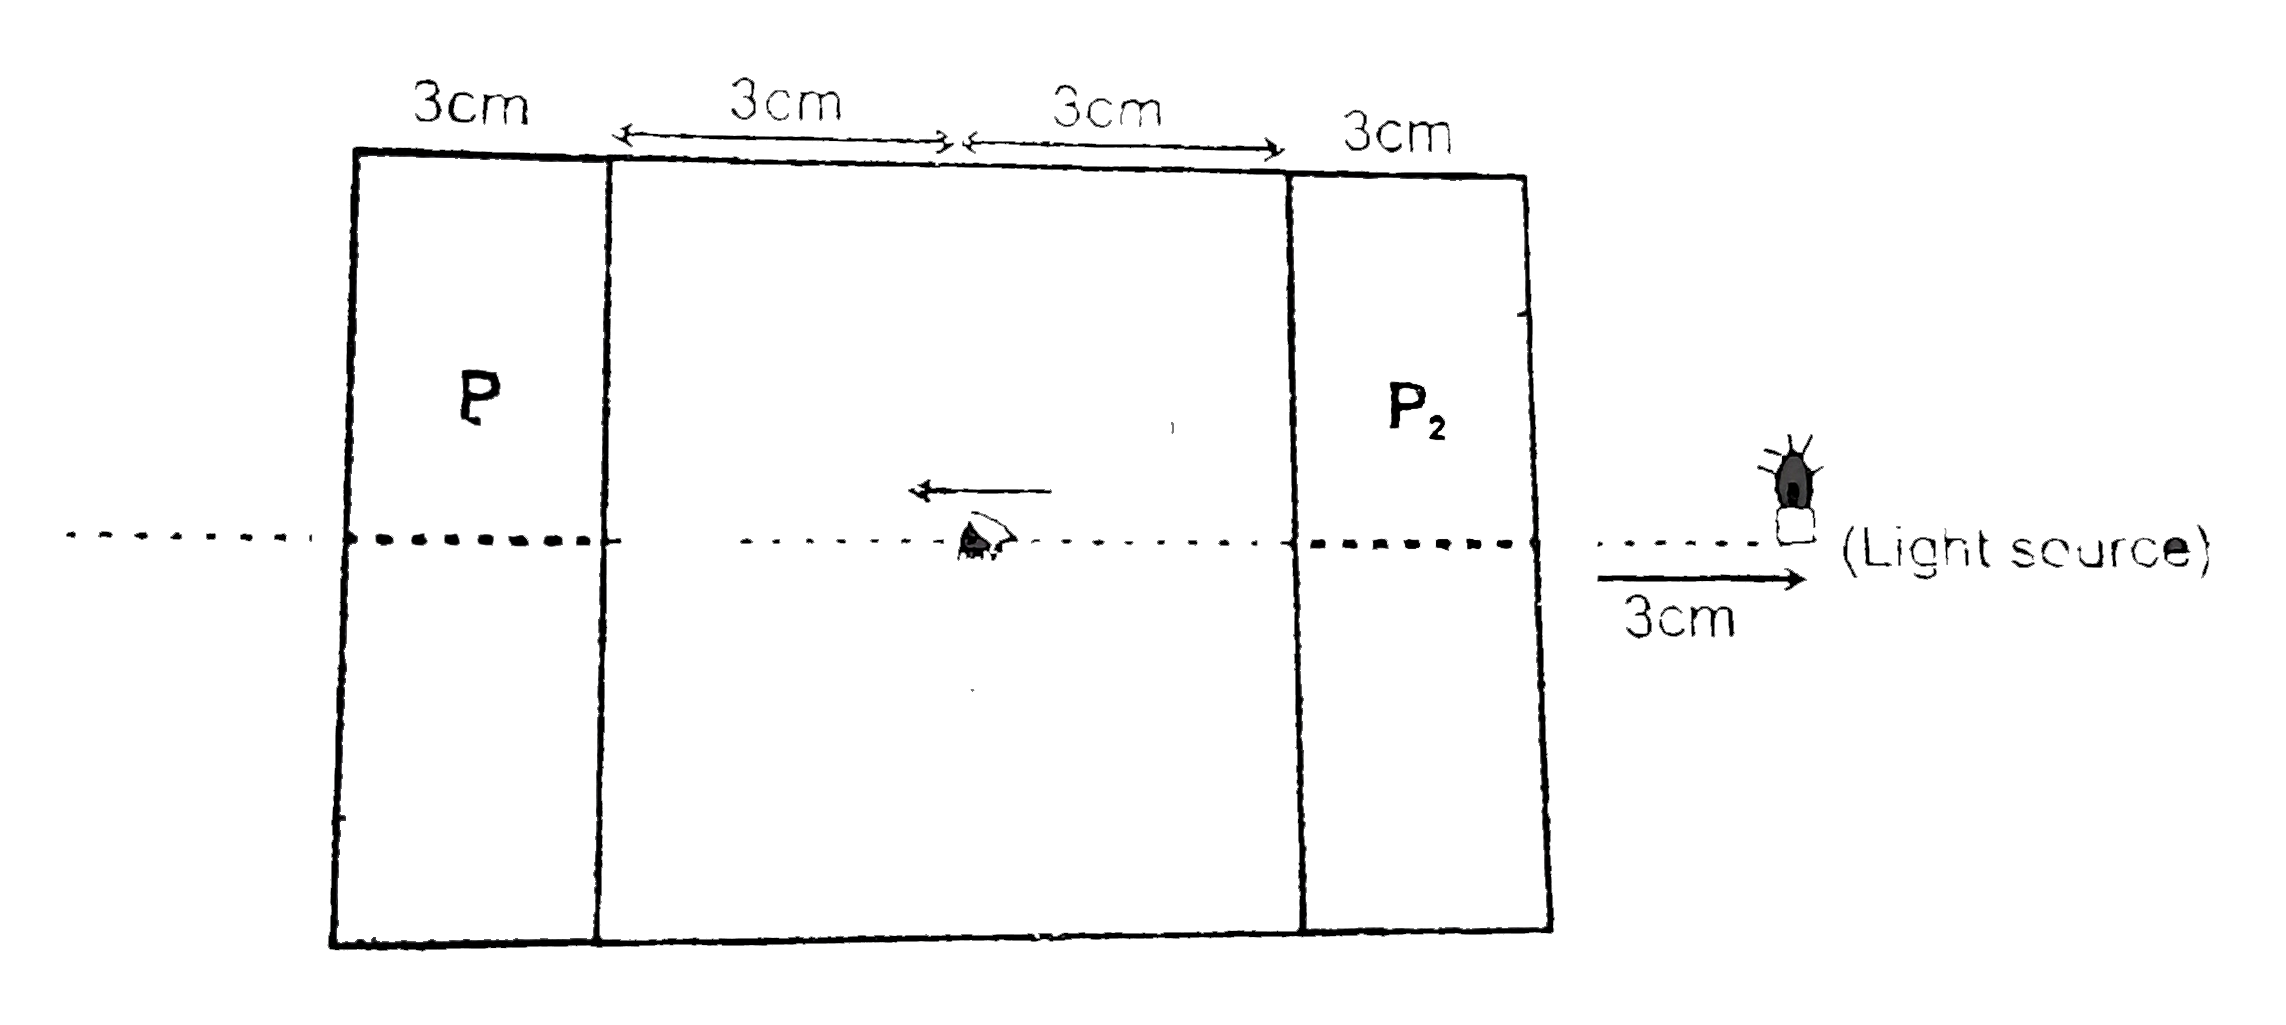 There is an insect a cabin eying towards thick glass plate P(1), Insect sees the images of light source acrss the glass plate P(1) outside tha chain. Cabin is made of thick glass plates of refractive index mu = (3)/(2) and thickness 3cm. Insect is eying from the middle of the cabin as shown in figure. (glass plates are partially reflective and consider only paraxial rays)        At what distance (from eye of insect) will the eye see first image?